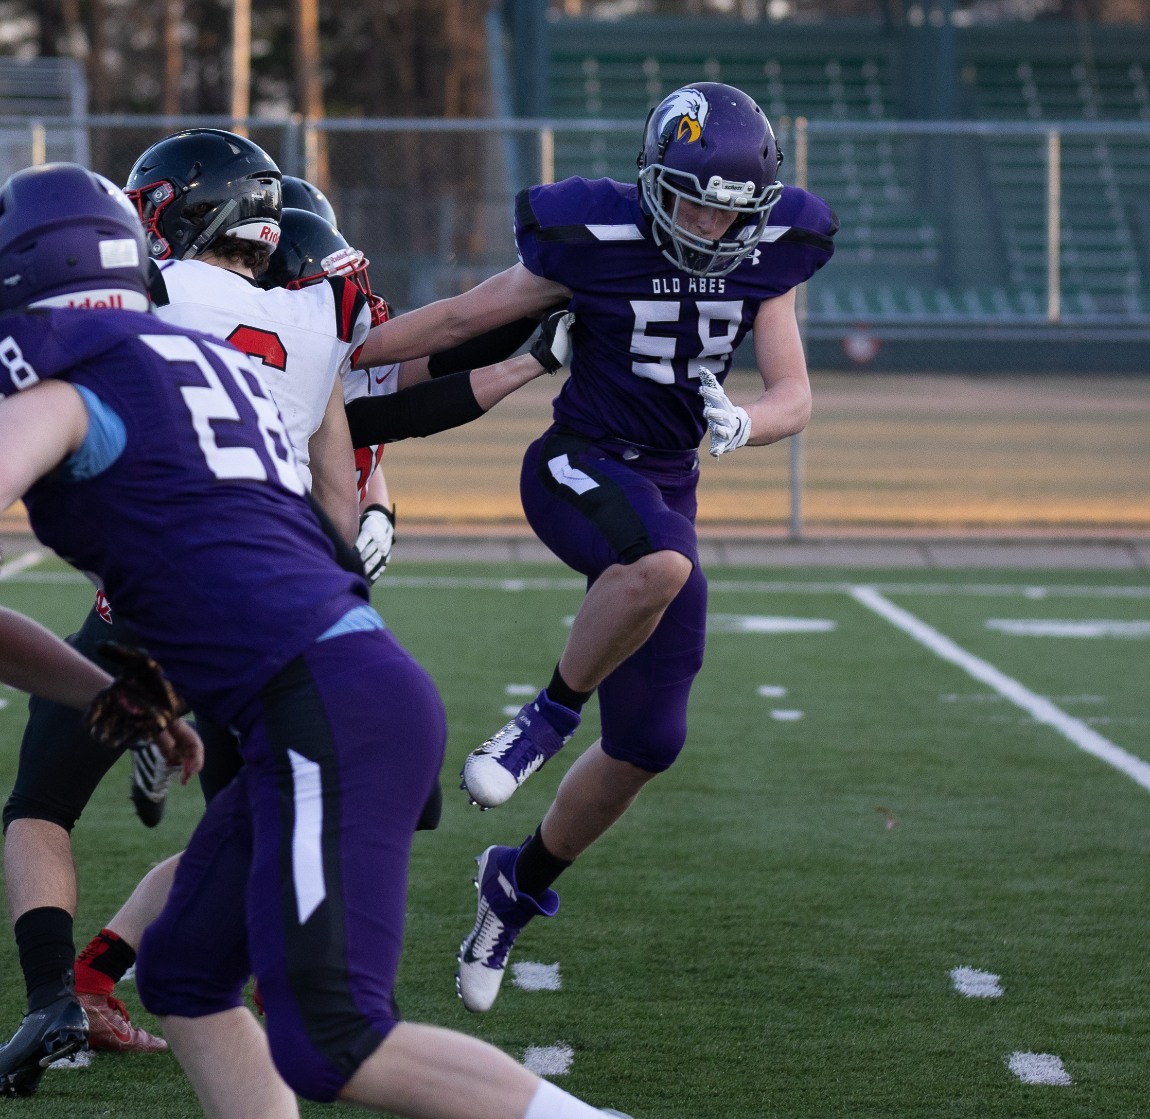 Eau-Claire-Memorial-JV-Football-LaCrosse-Central-at-Home-3-29-21-1375